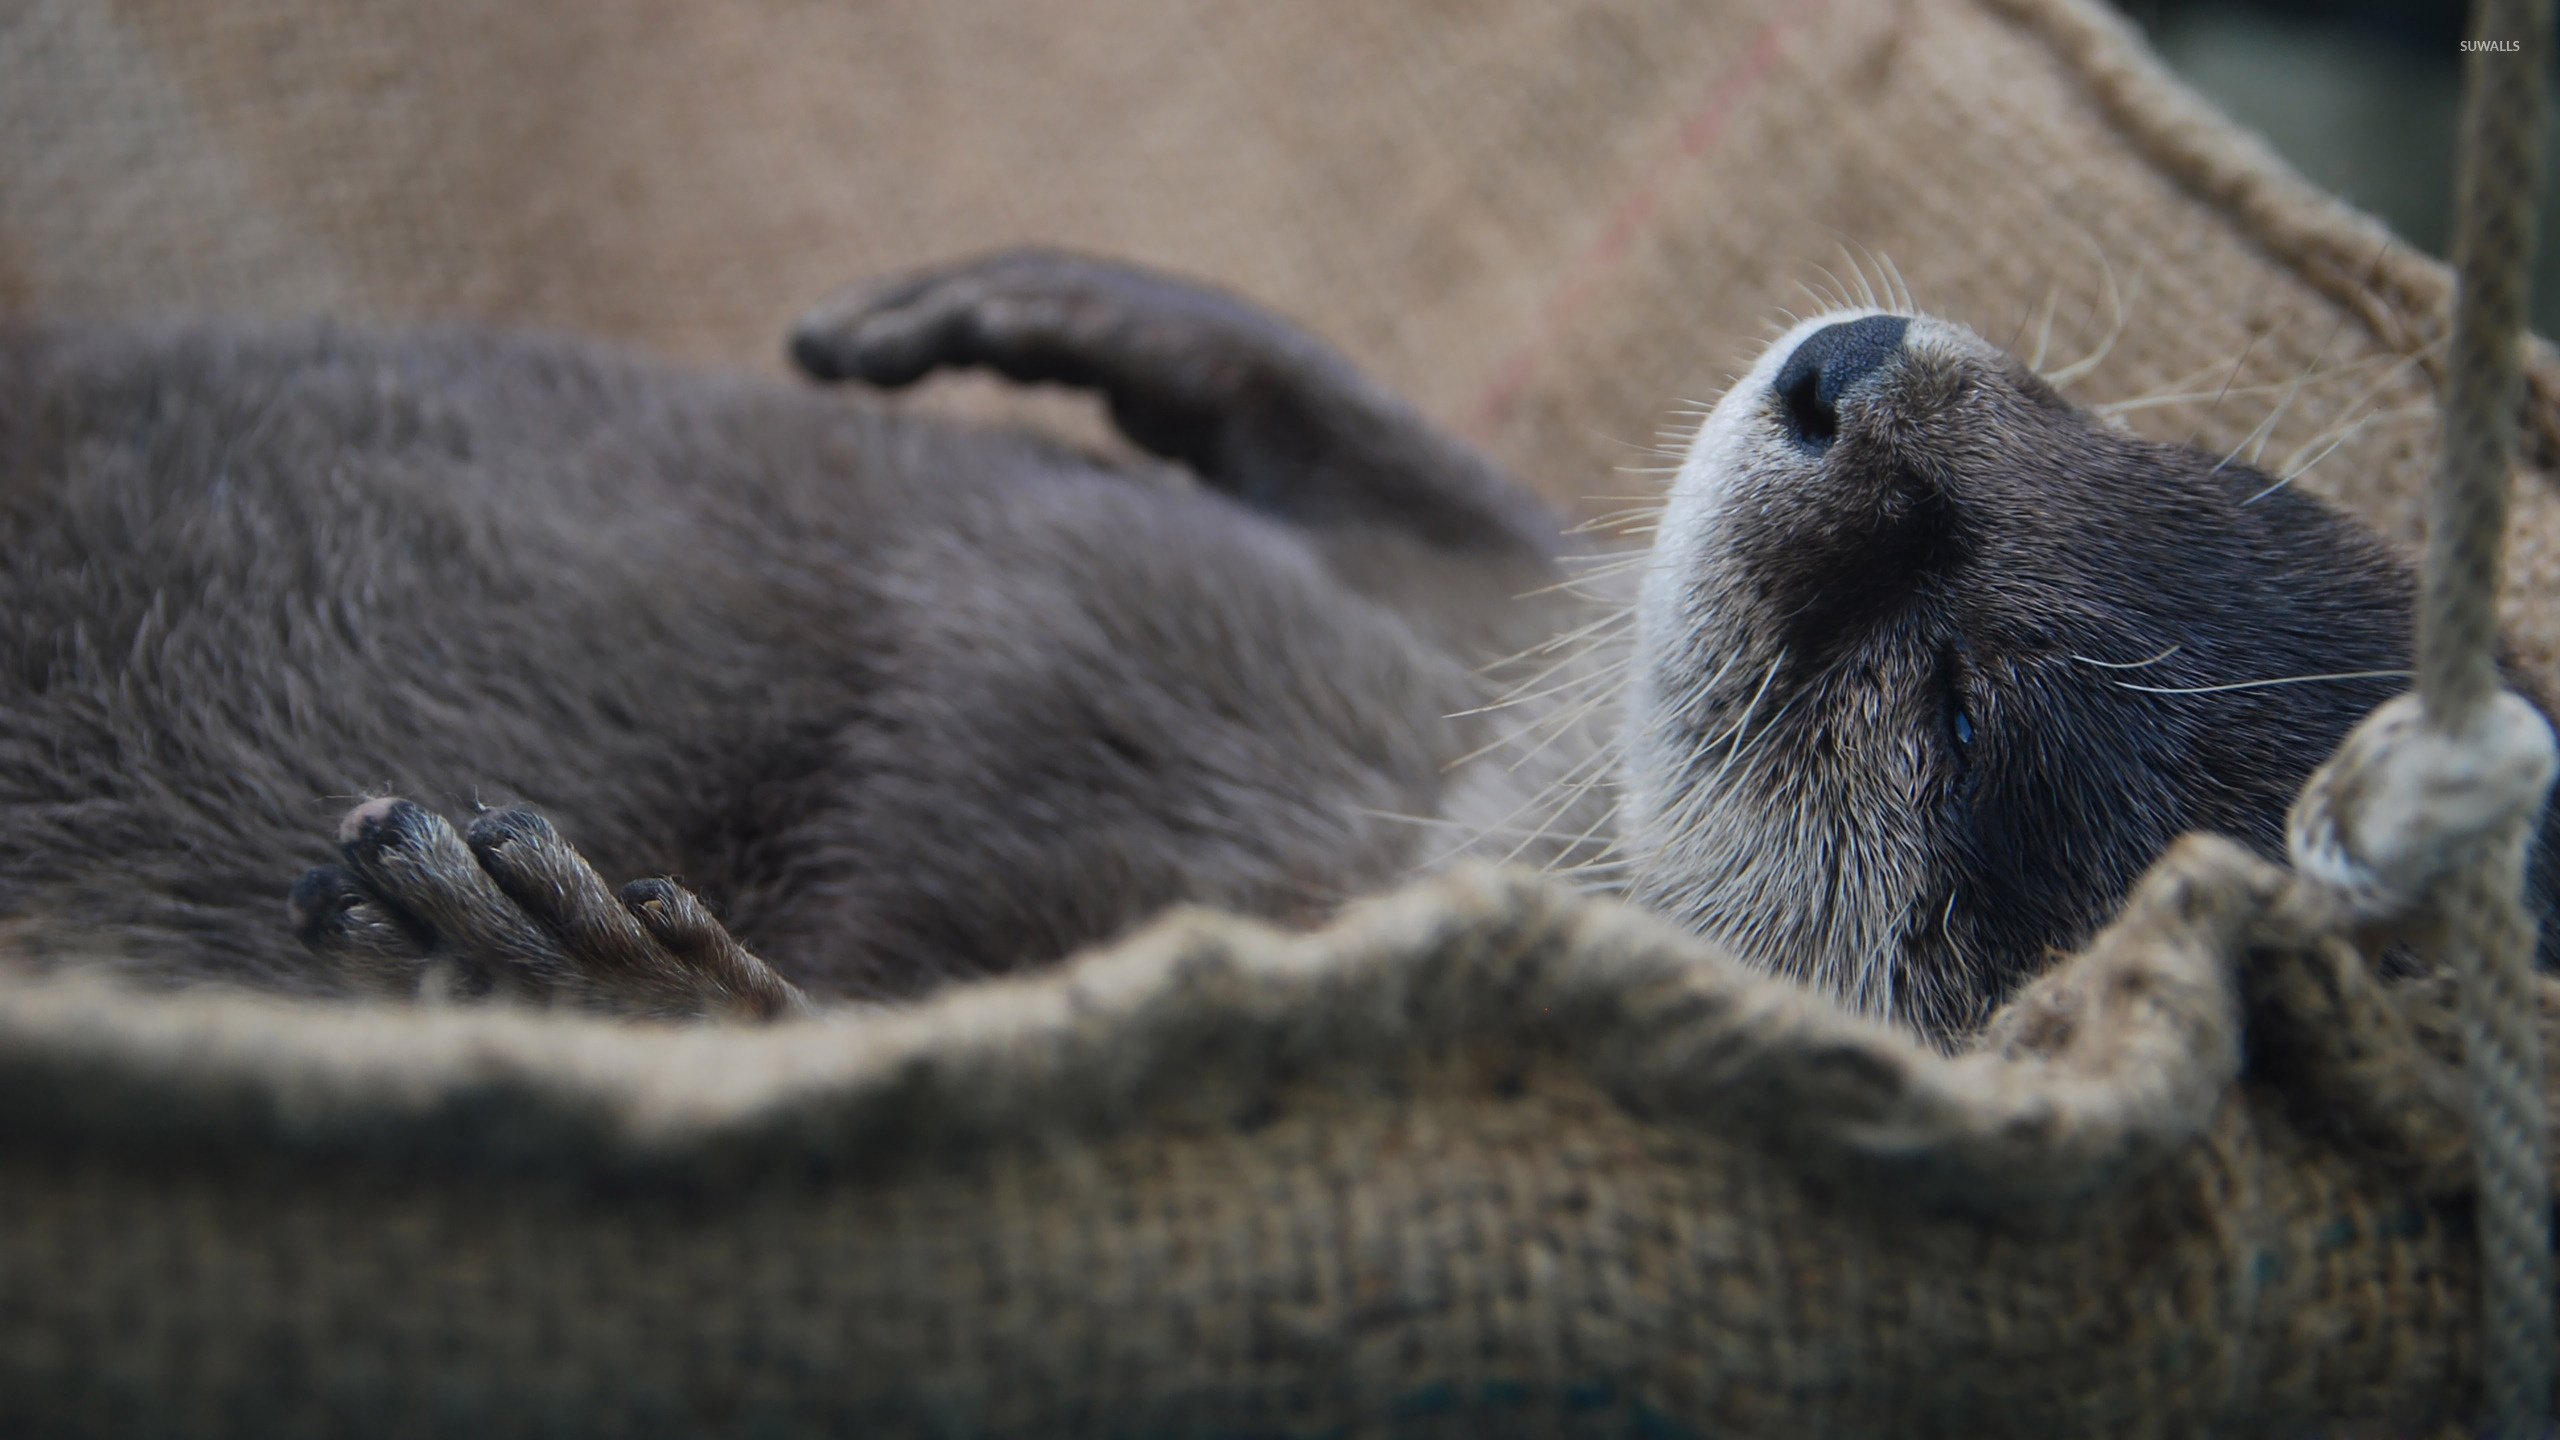 Sleeping otter beauty, Calm and peaceful, Resting in harmony, Nature's tranquility, 2560x1440 HD Desktop